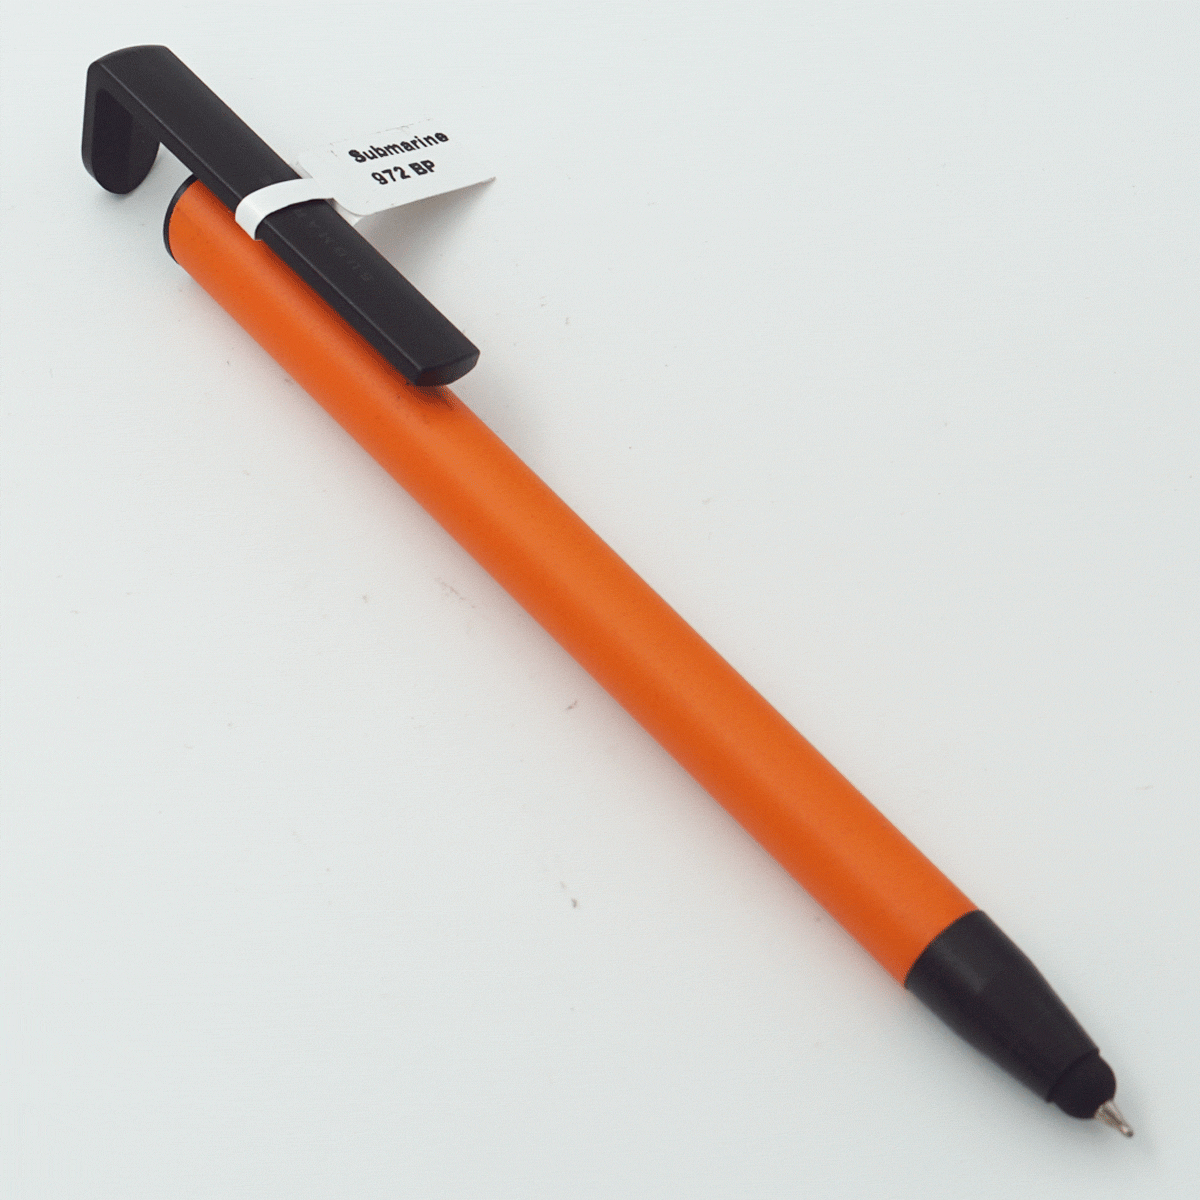 Submarine 972 Orange Color Body With Black Color Clip And Grip On Stylus Fine Tip Retractable Type Ball Pen SKU 23801